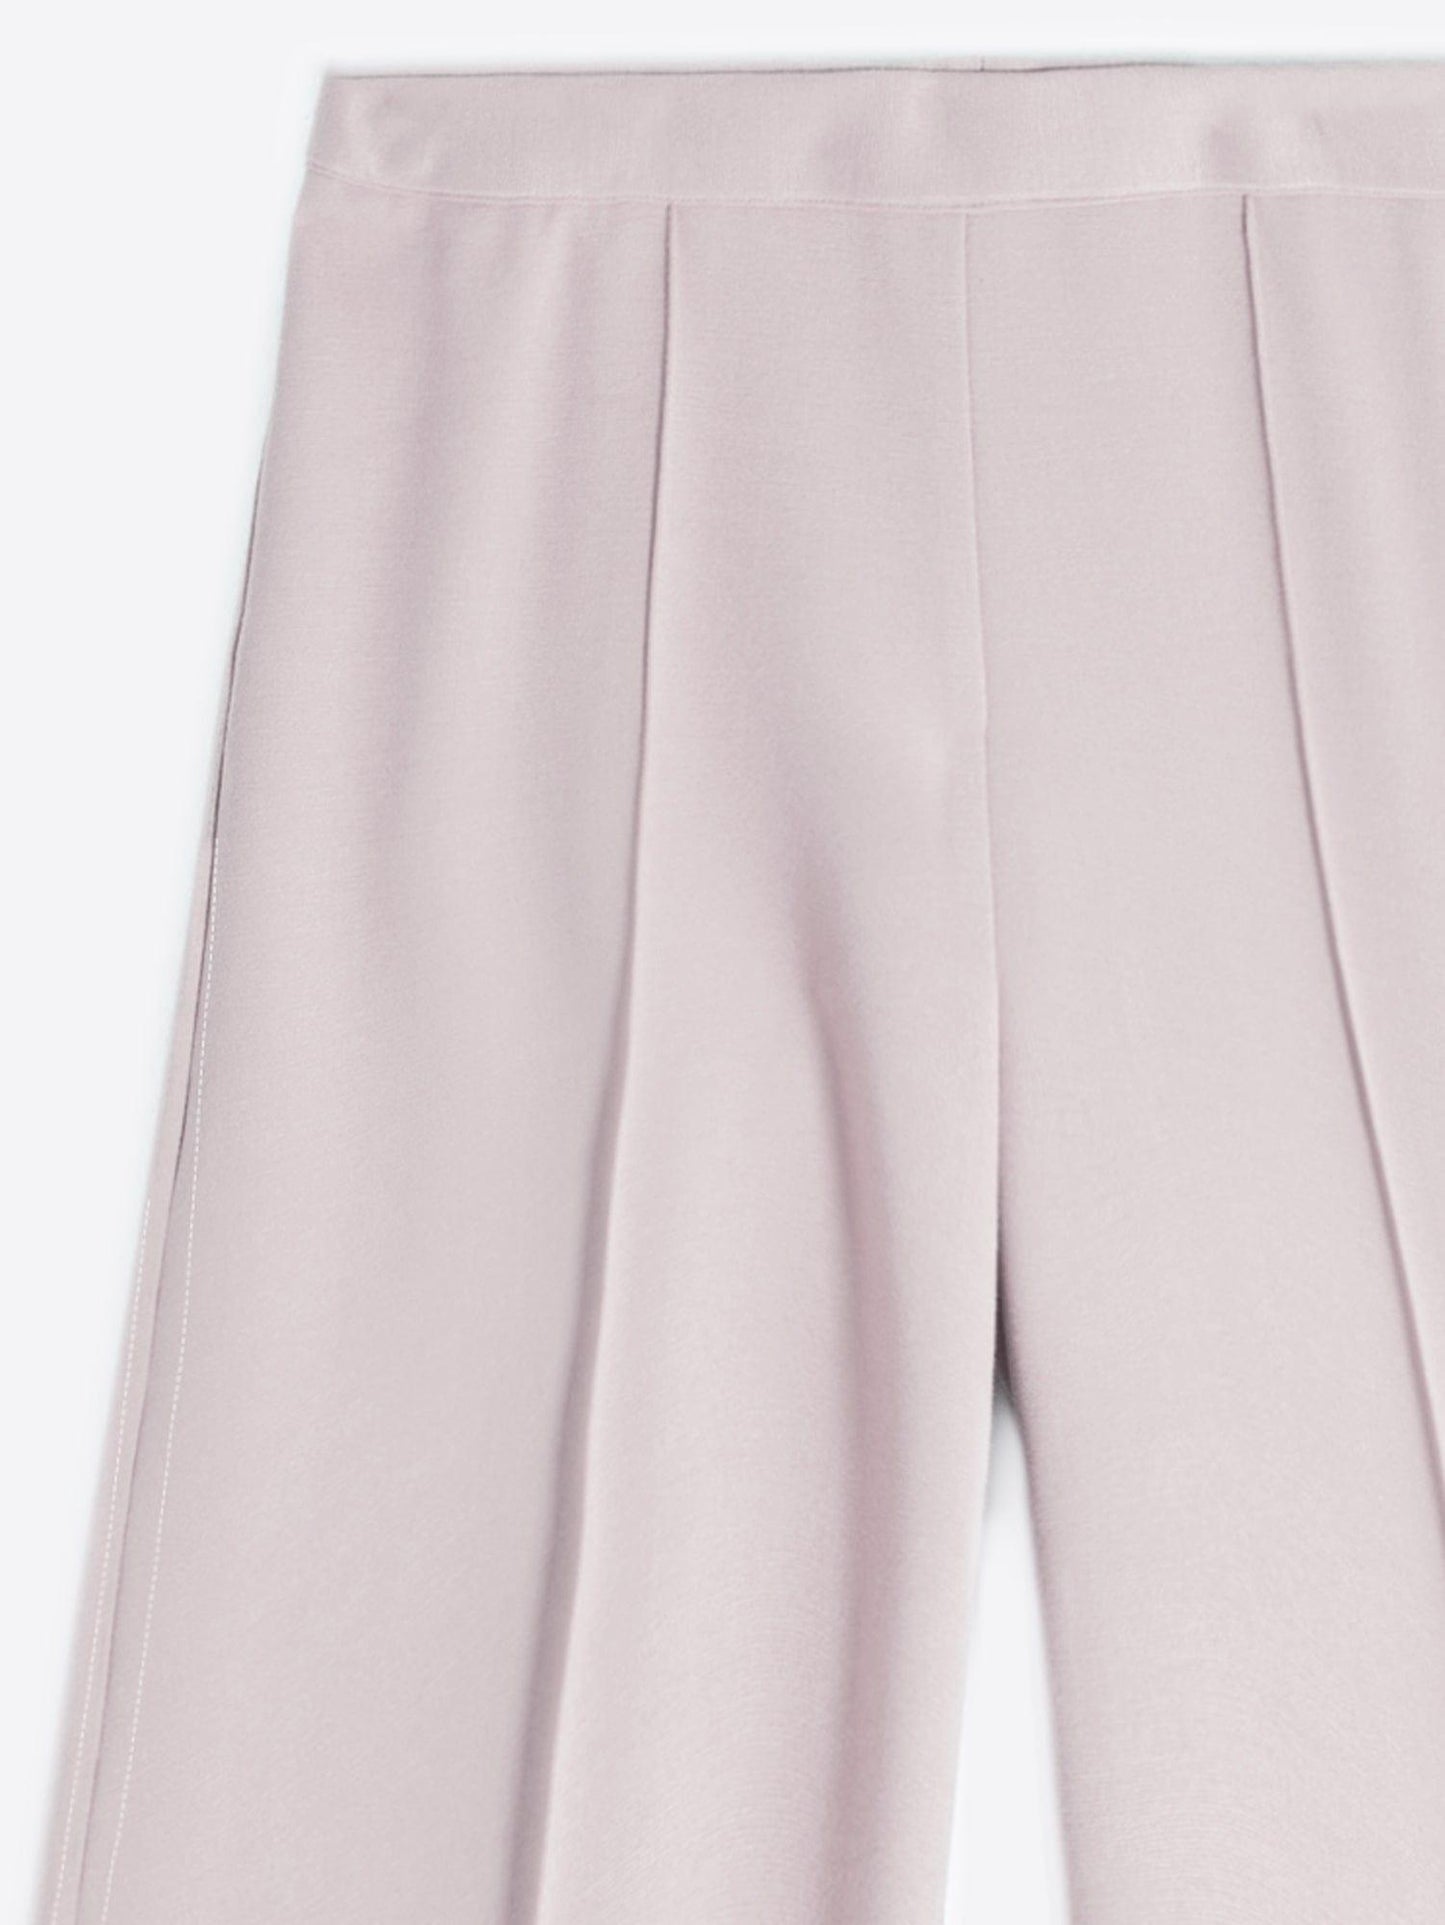 Vilagallo Ivory Knit Perfect Trousers